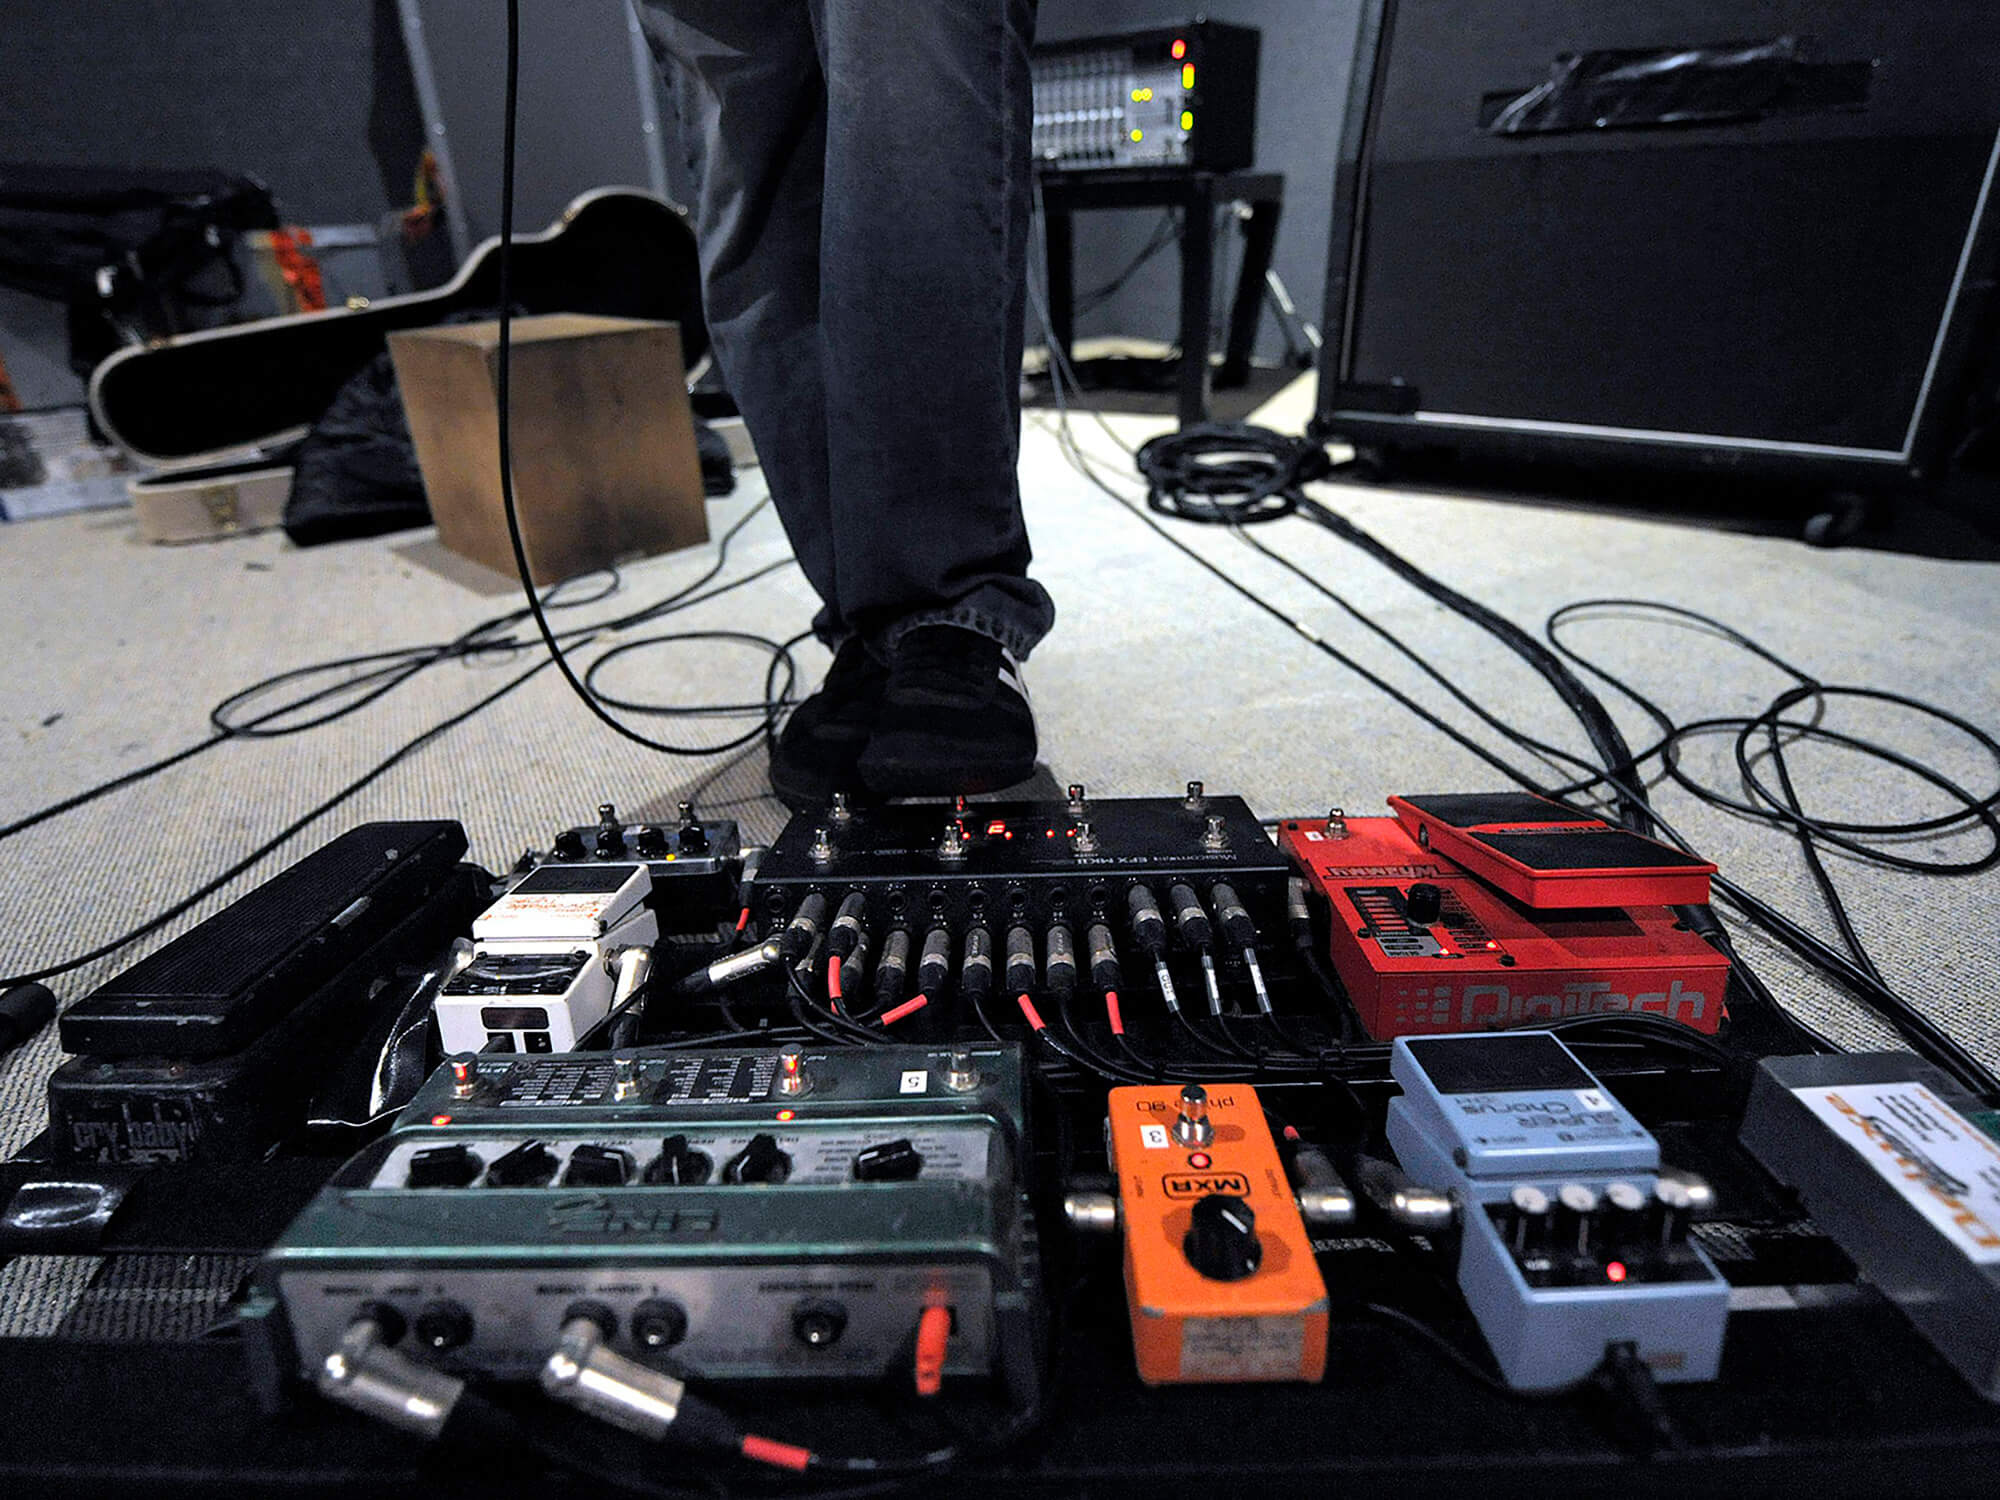 A guitarist operating a rack of guitar effects pedals